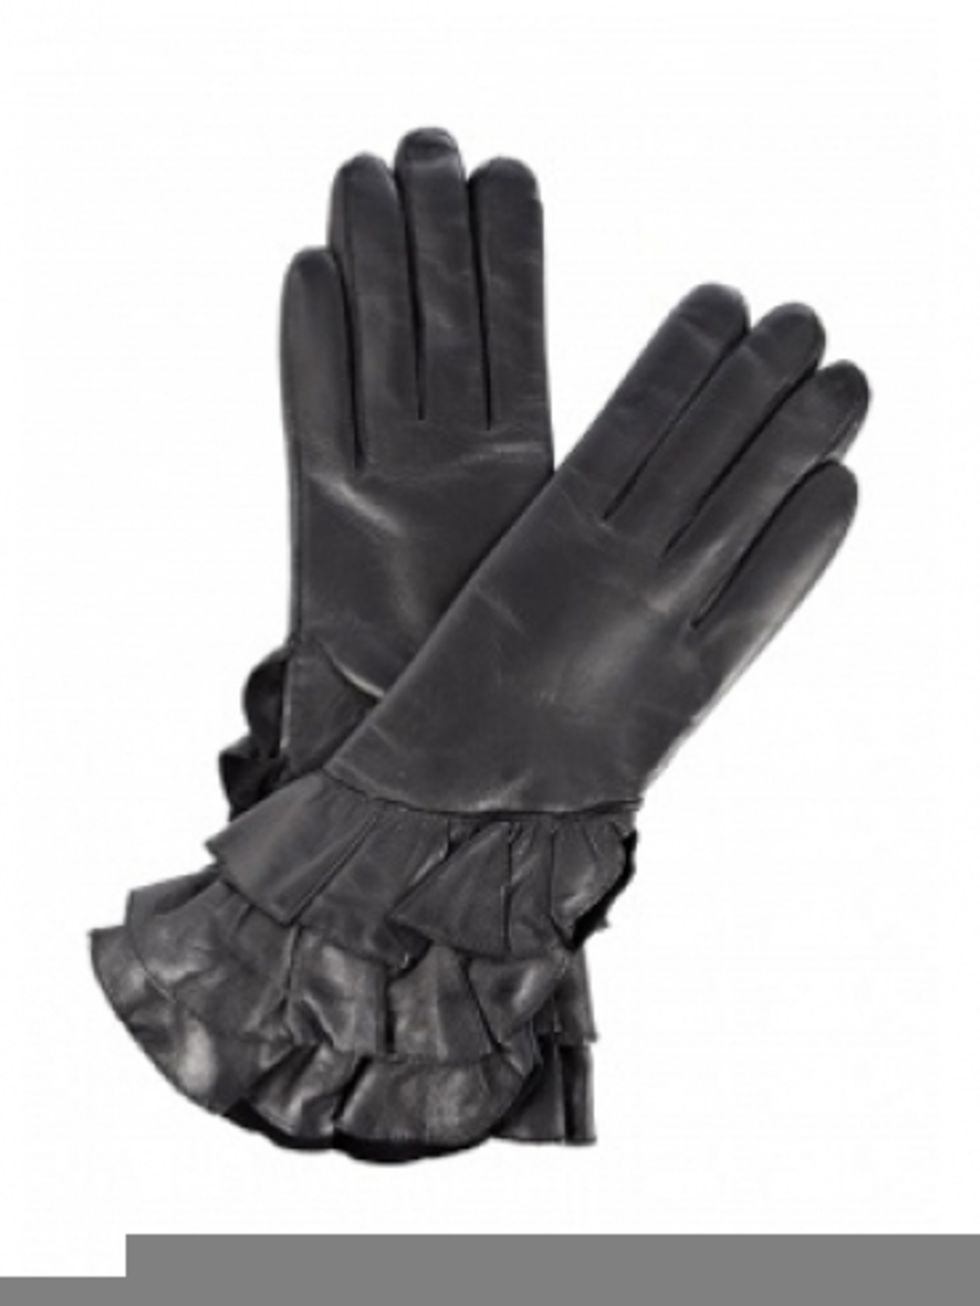 Finger, Hand, Personal protective equipment, Thumb, Gesture, Glove, Black, Wrist, Safety glove, Black-and-white, 